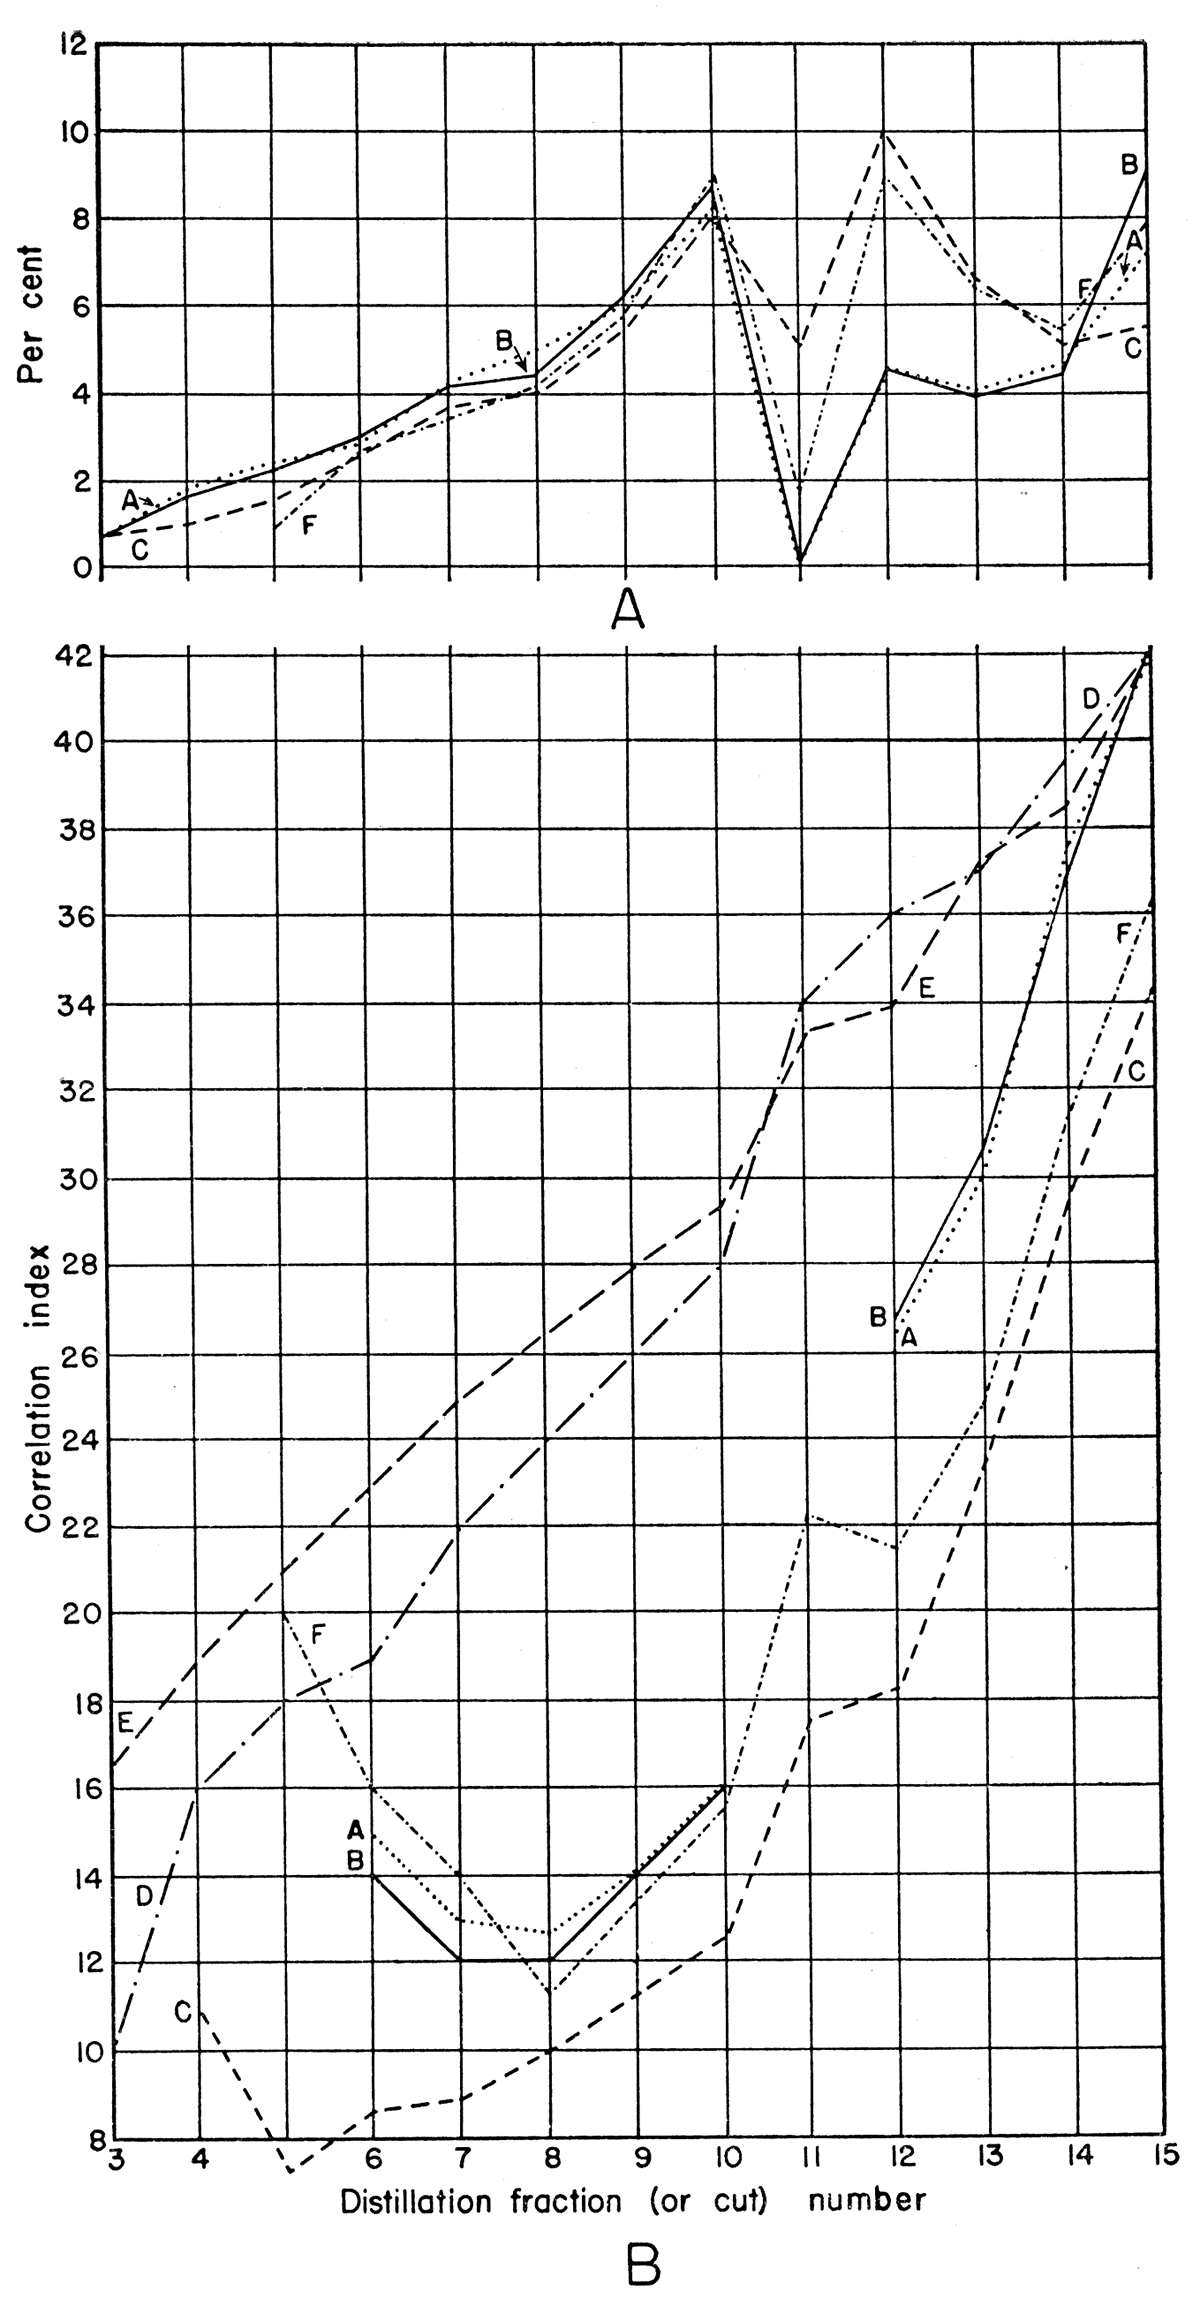 Curves showing percentage of distillation fractions and correlation indices of Hempel analyses of McLouth and Falls City oils.